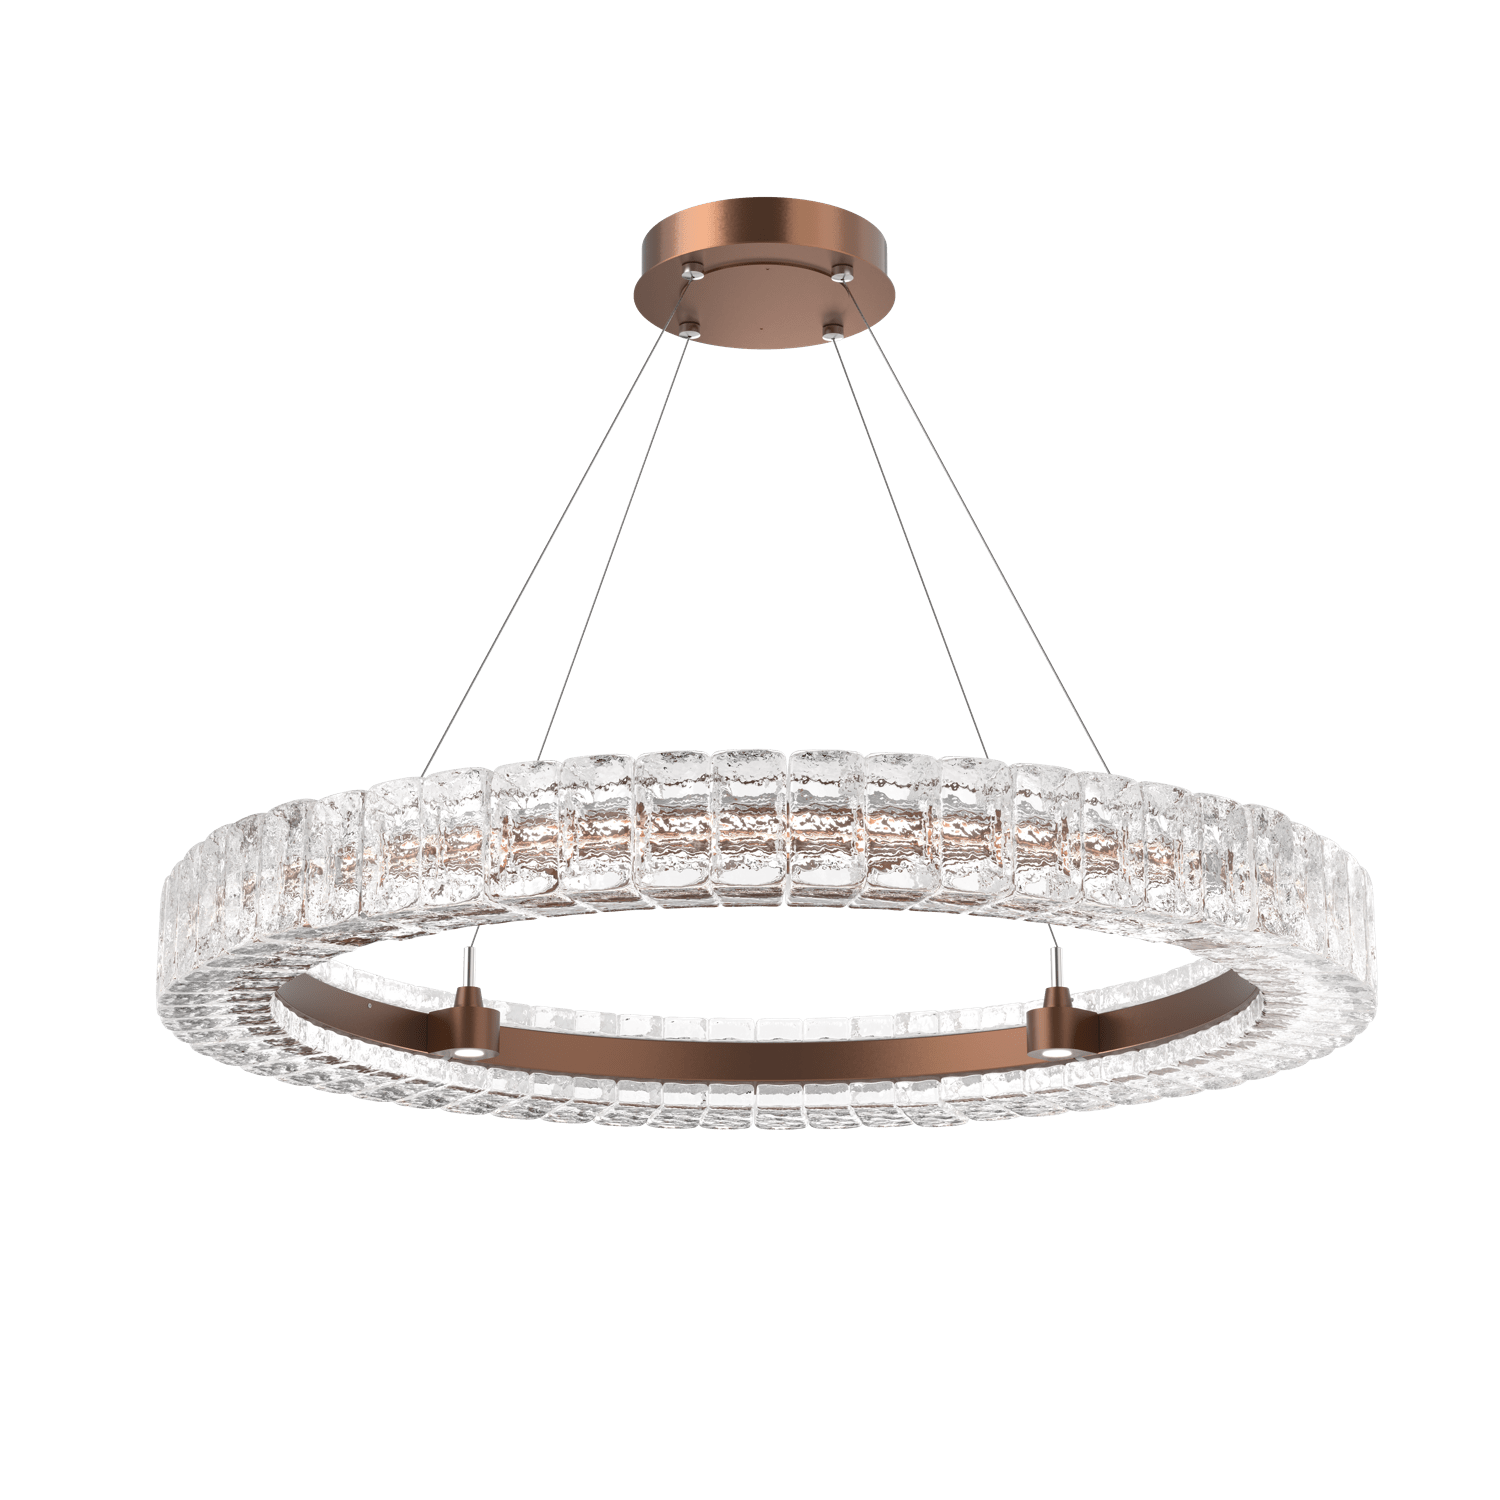 CHB0080-36-BB-Hammerton-Studio-Asscher-36-inch-ring-chandelier-with-burnished-bronze-finish-and-clear-cast-glass-shades-and-LED-lamping